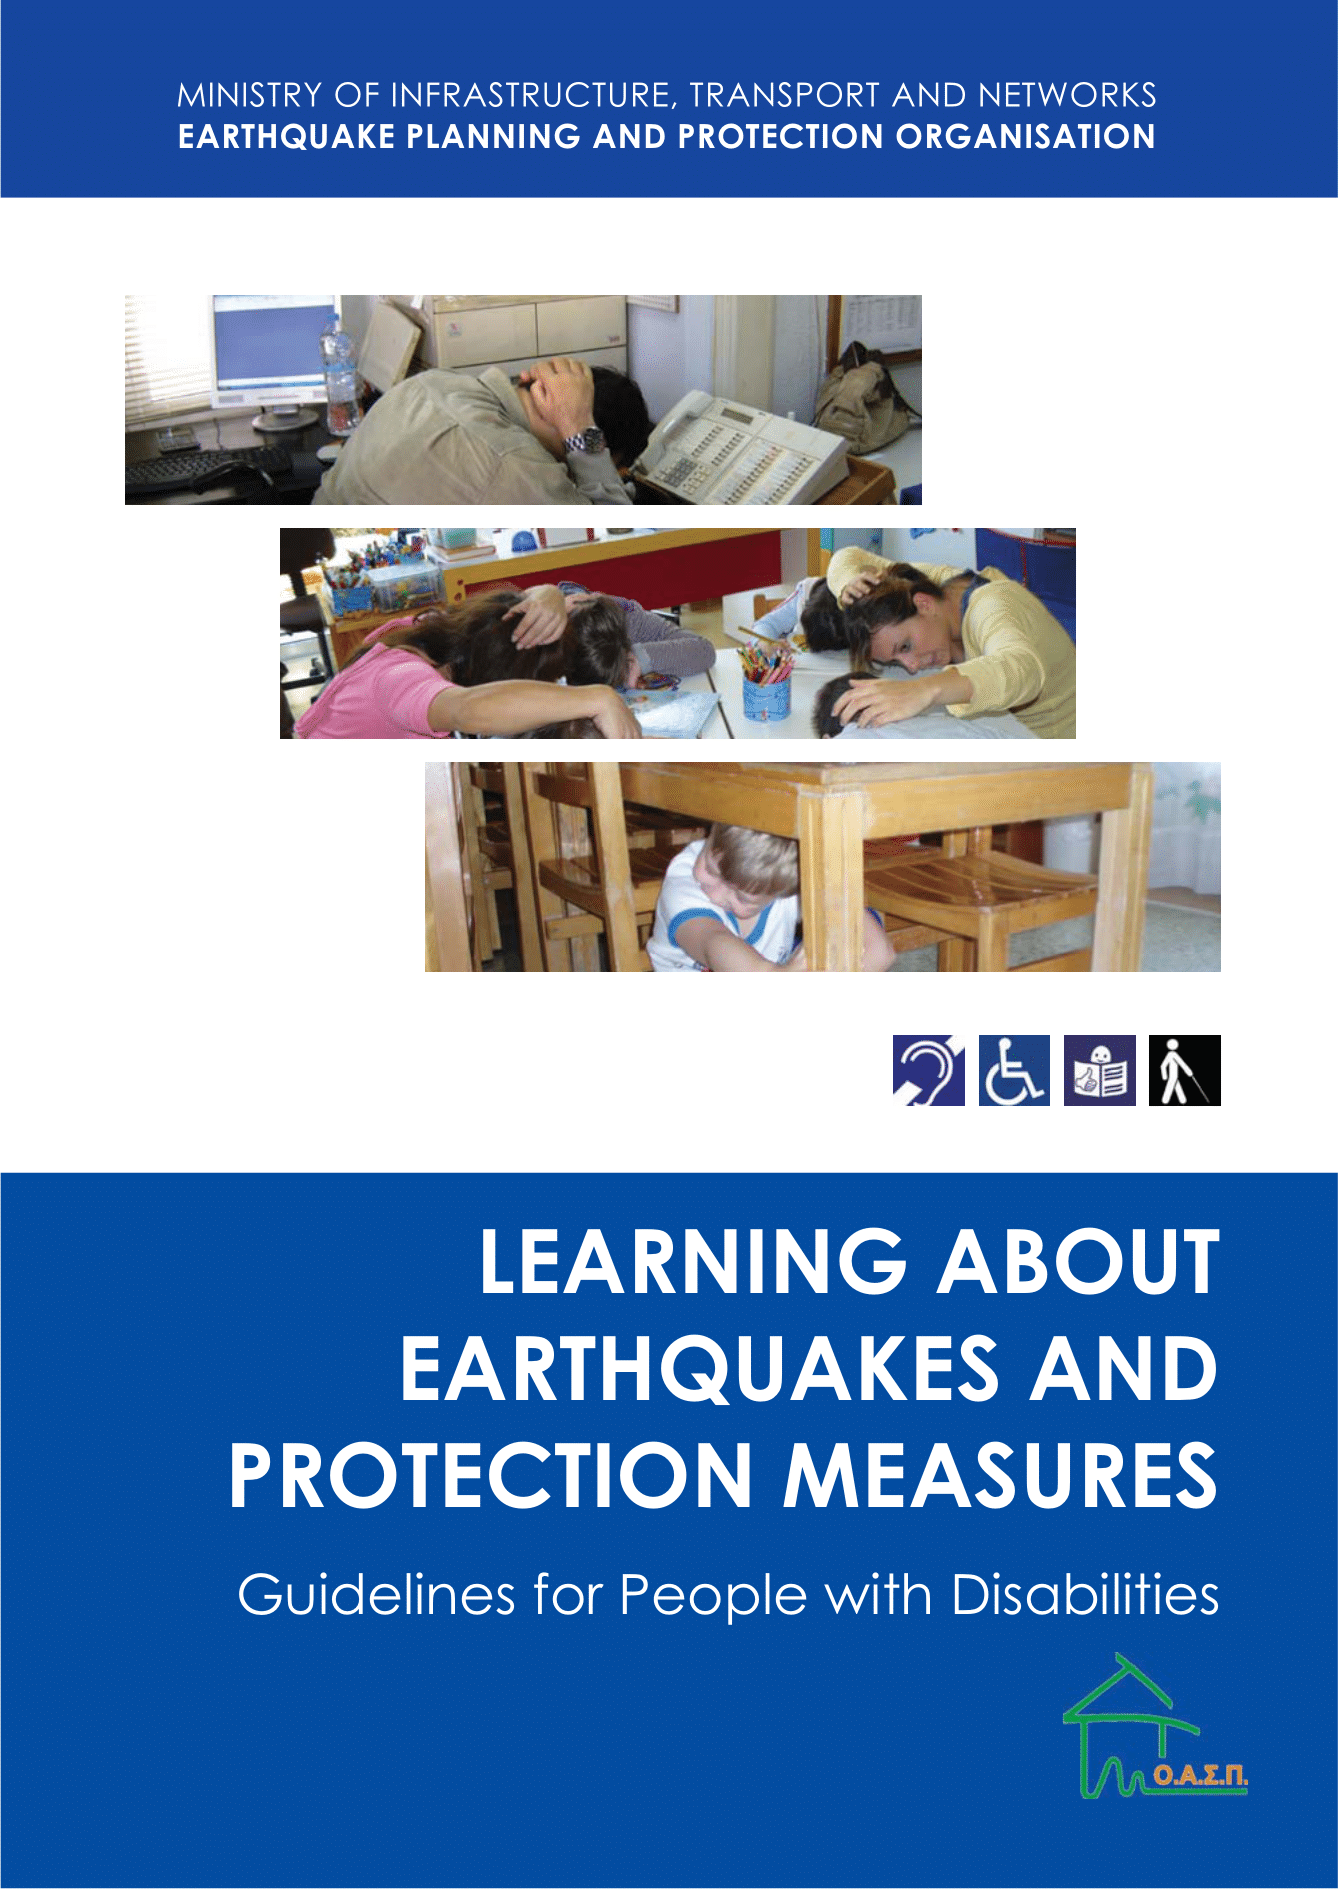 Learning about Earthquakes and Protection Measures (Guidelines for People with Disabilities)